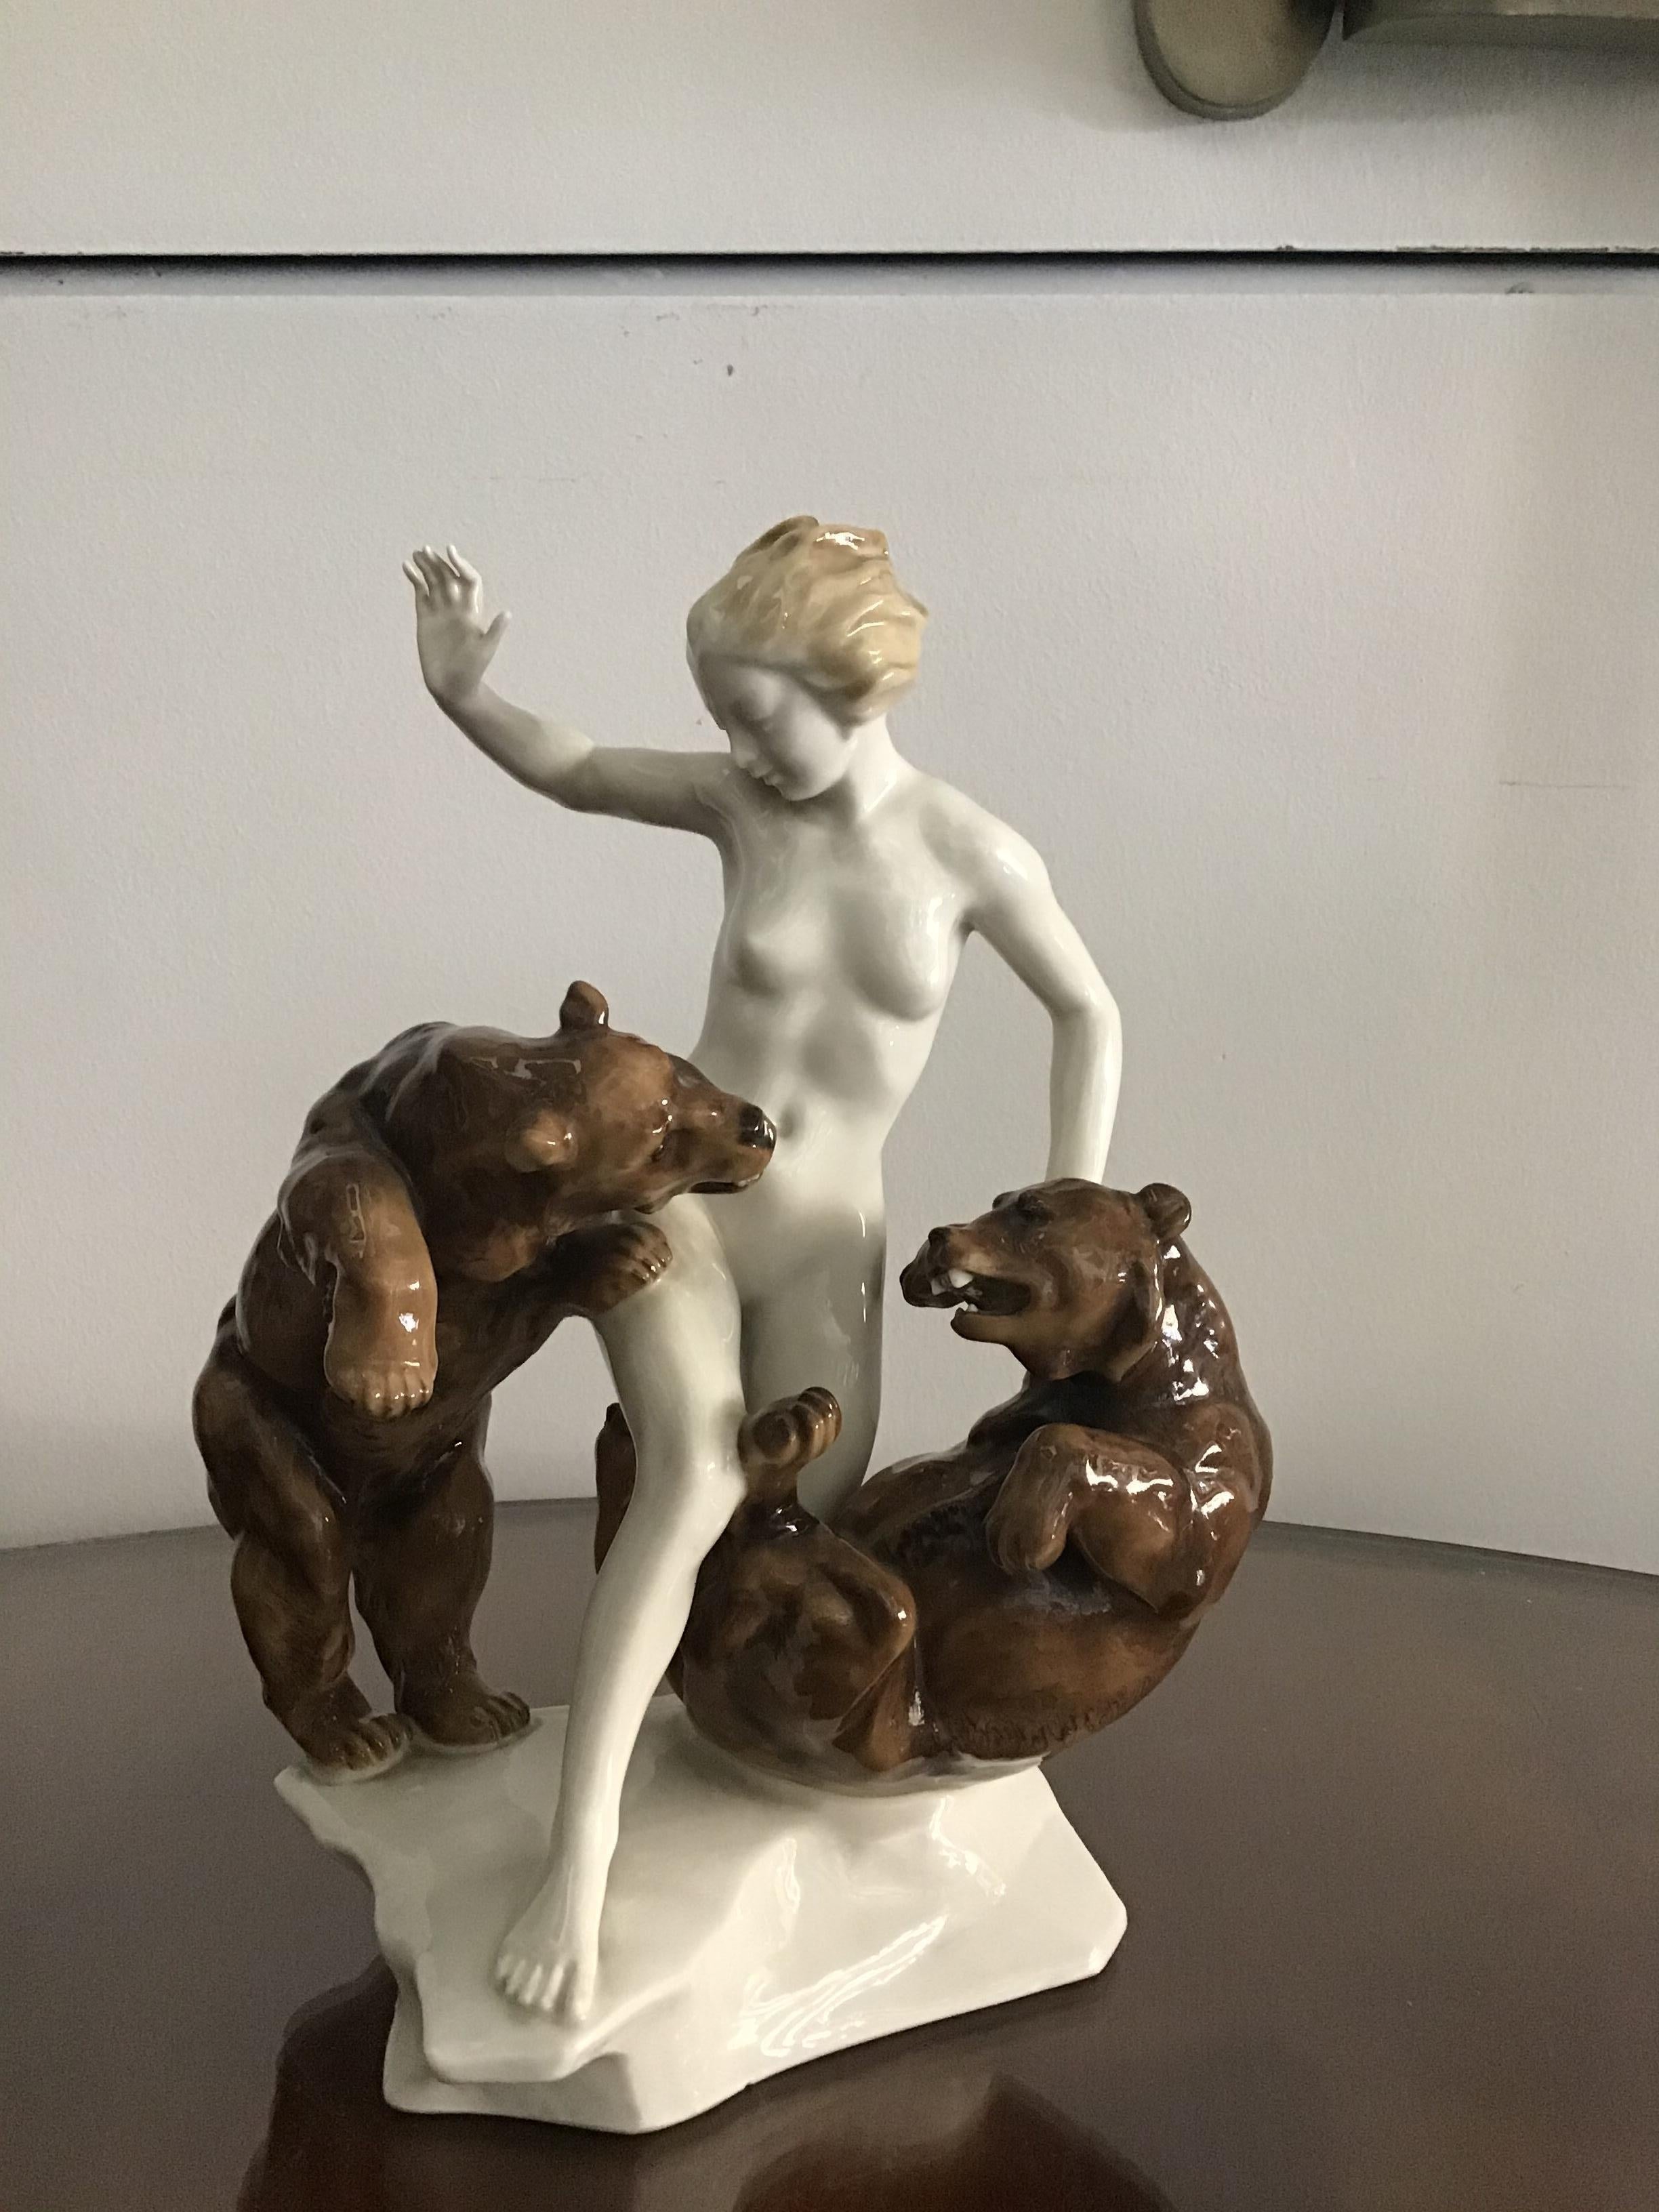 K.Tutter “Woman with bears” porcelain, 1940, Germany.